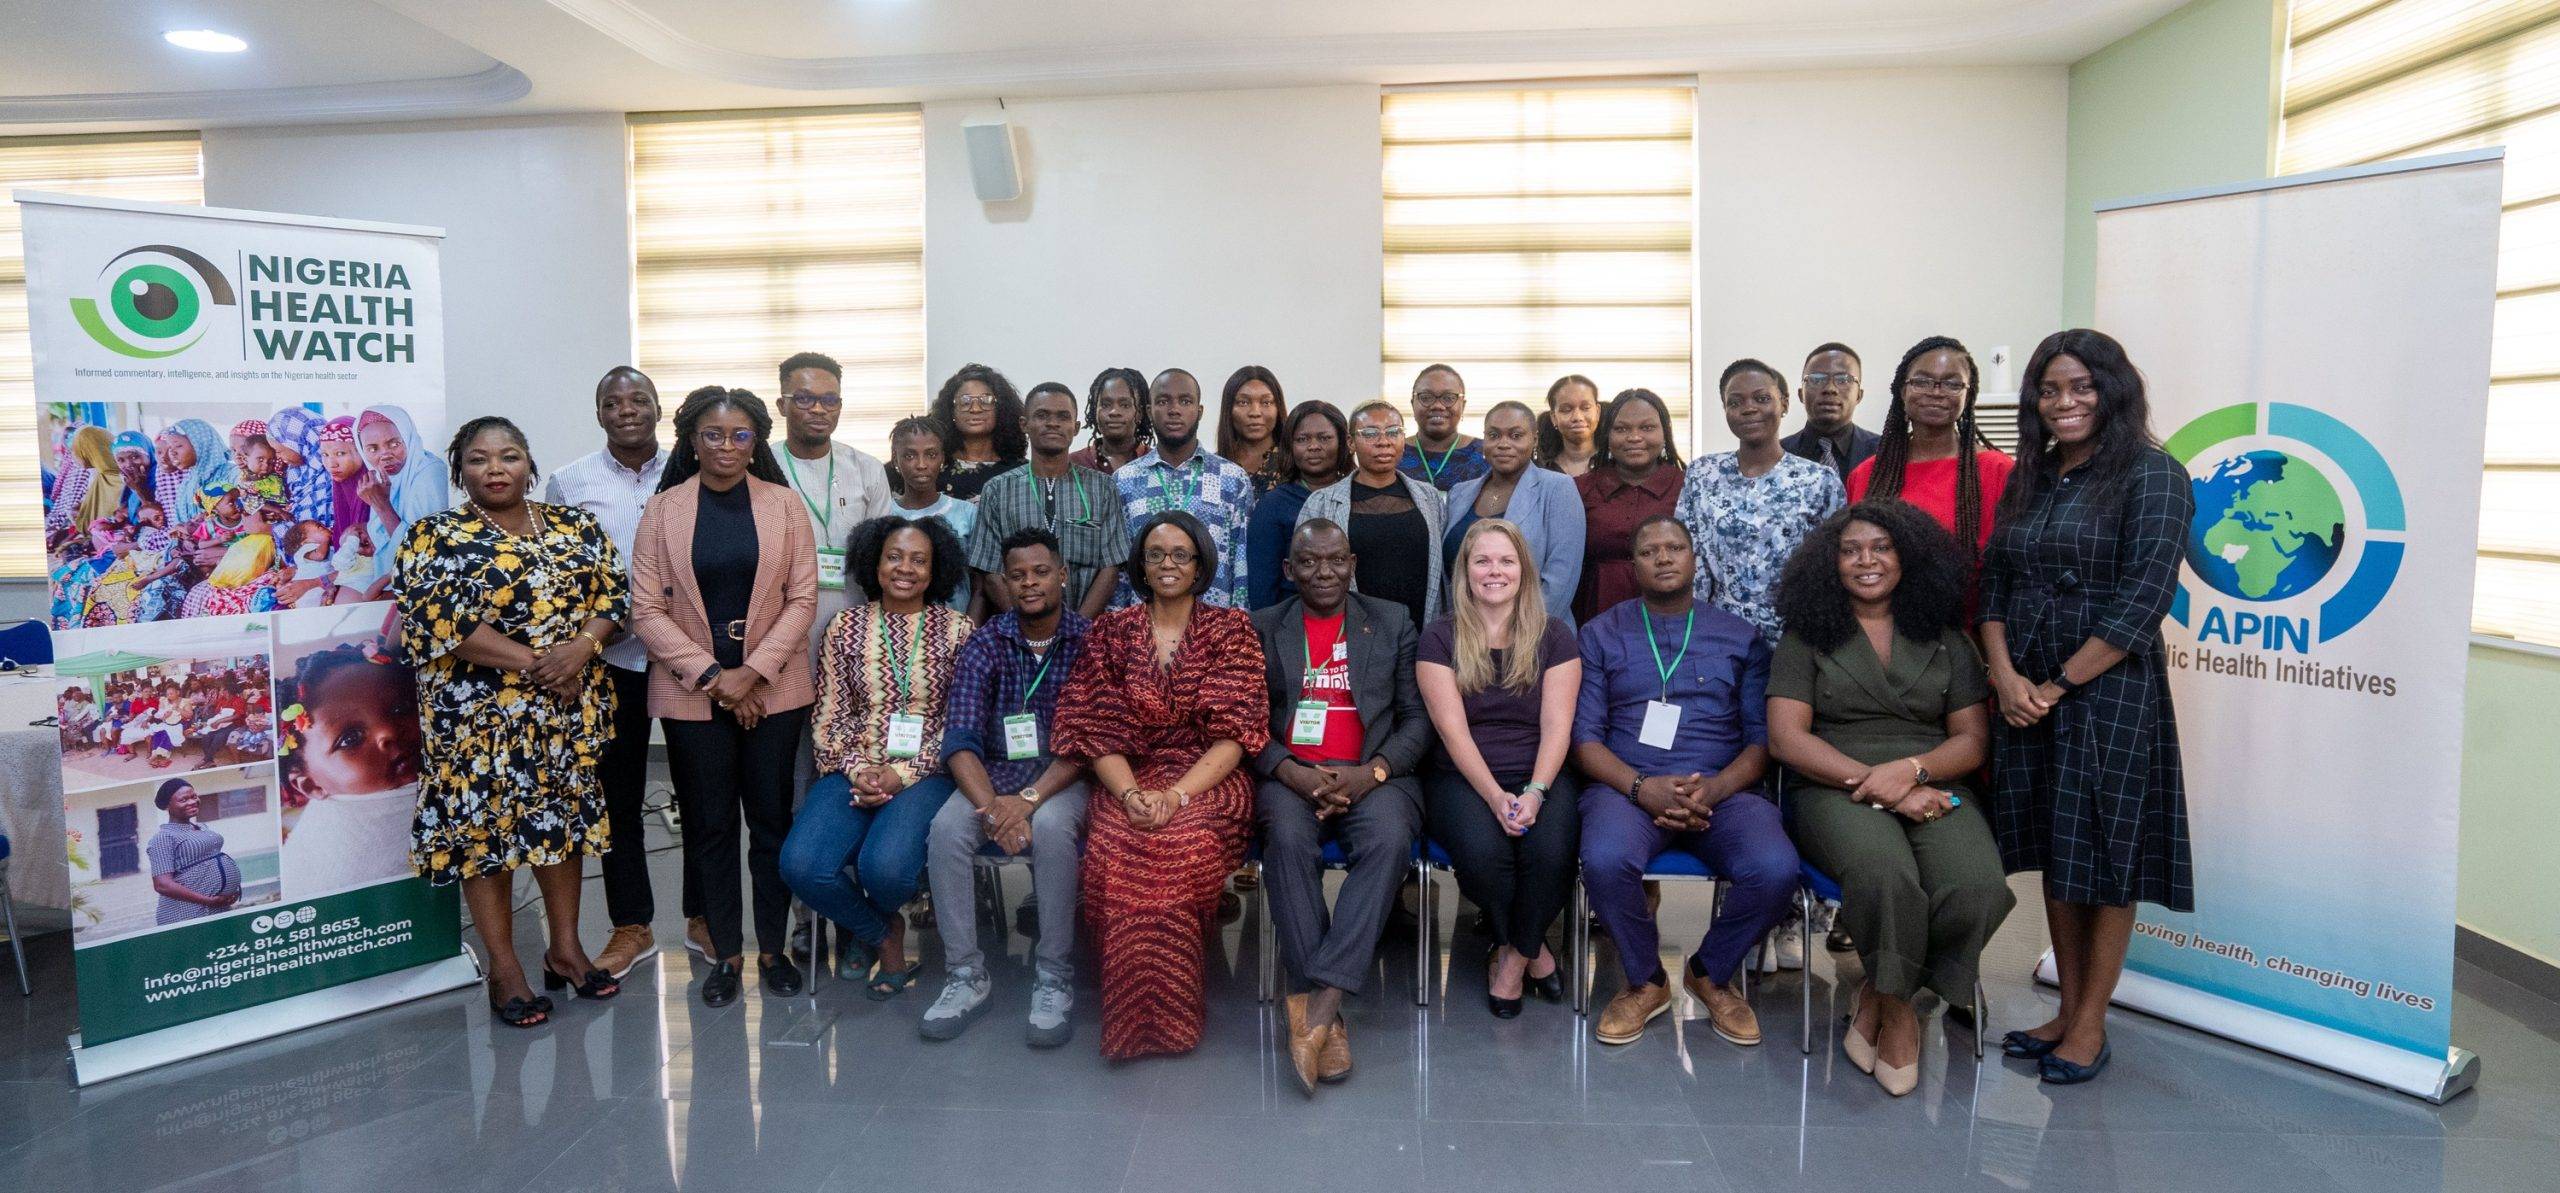 APIN Hosts Message Validation Workshop In Partnership With Nigeria Health Watch And Social Media Influencers to Promote HIV Testing Among Adolescents